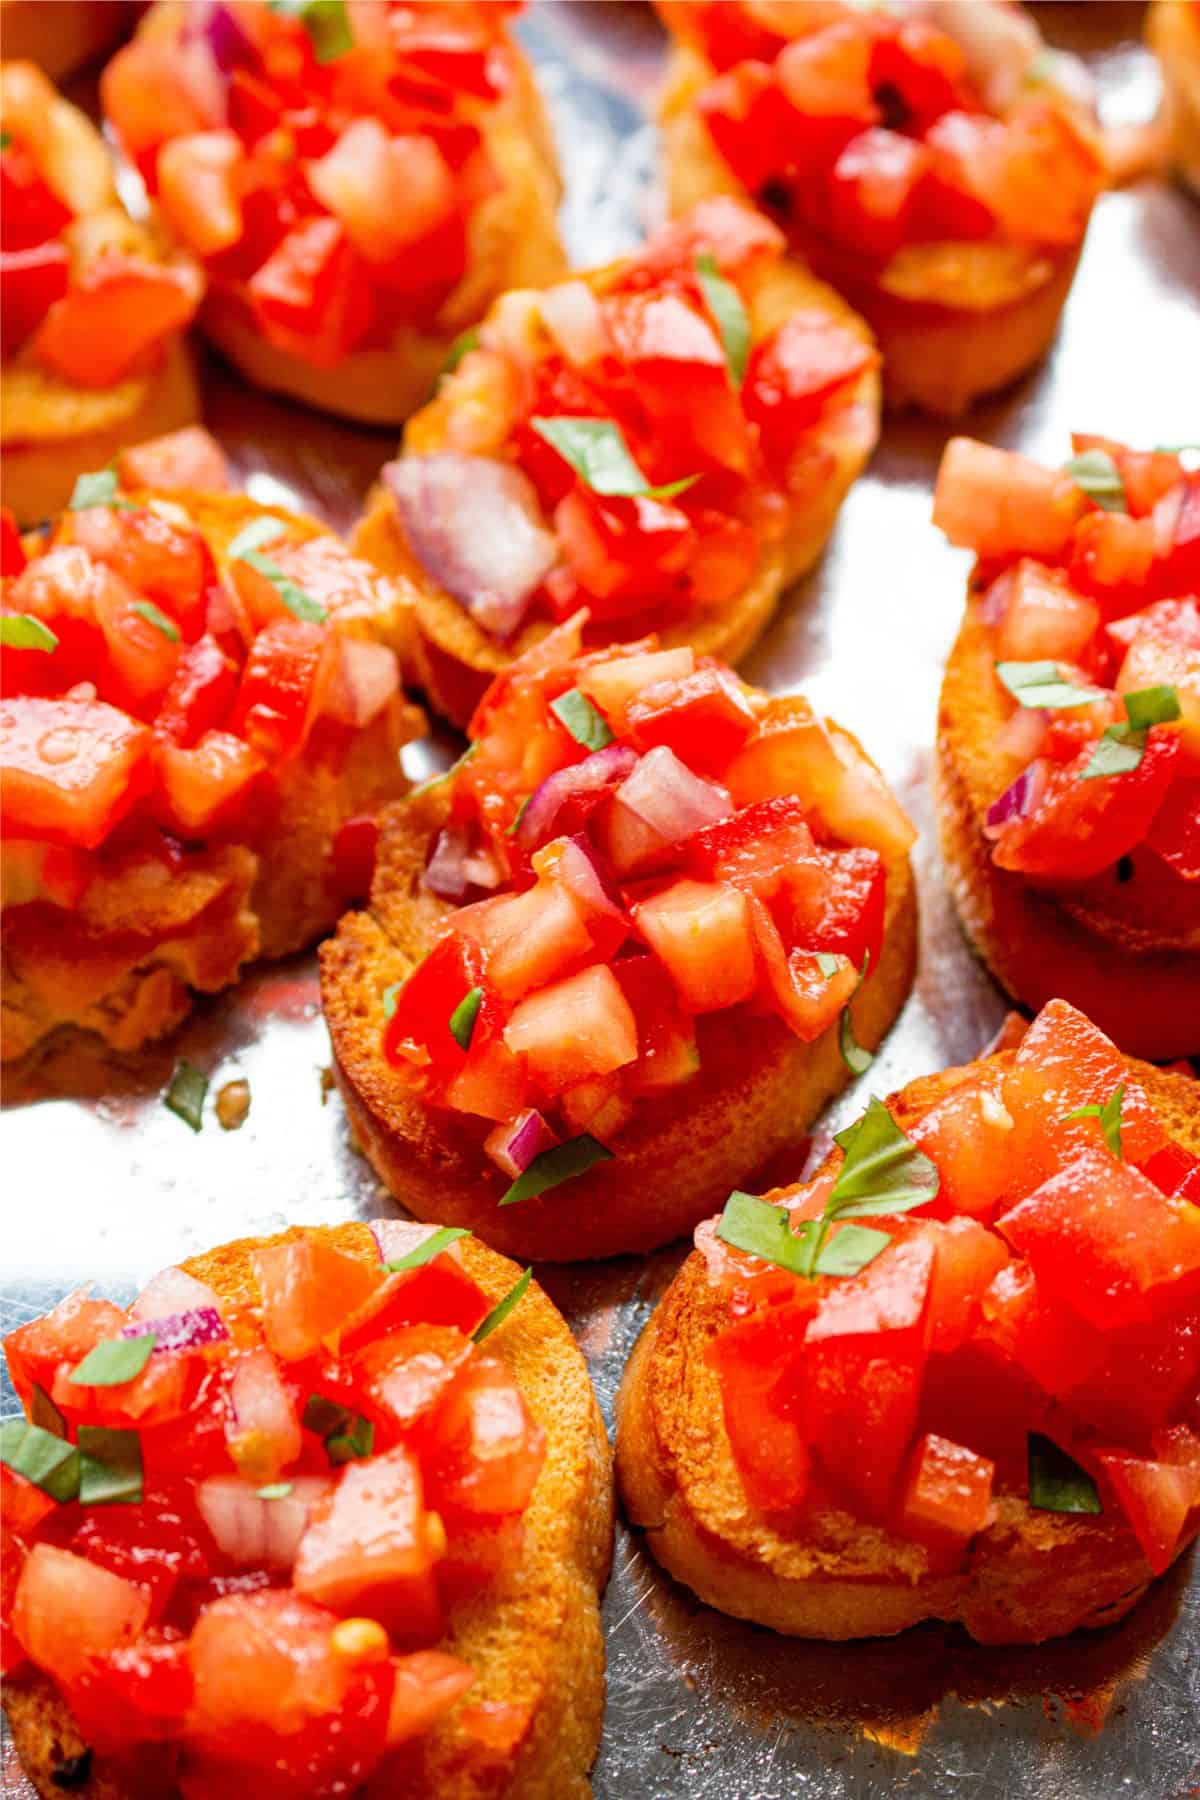 Close up of small rounds of toasted bread topped with chopped tomatoes and onions on a baking tray.